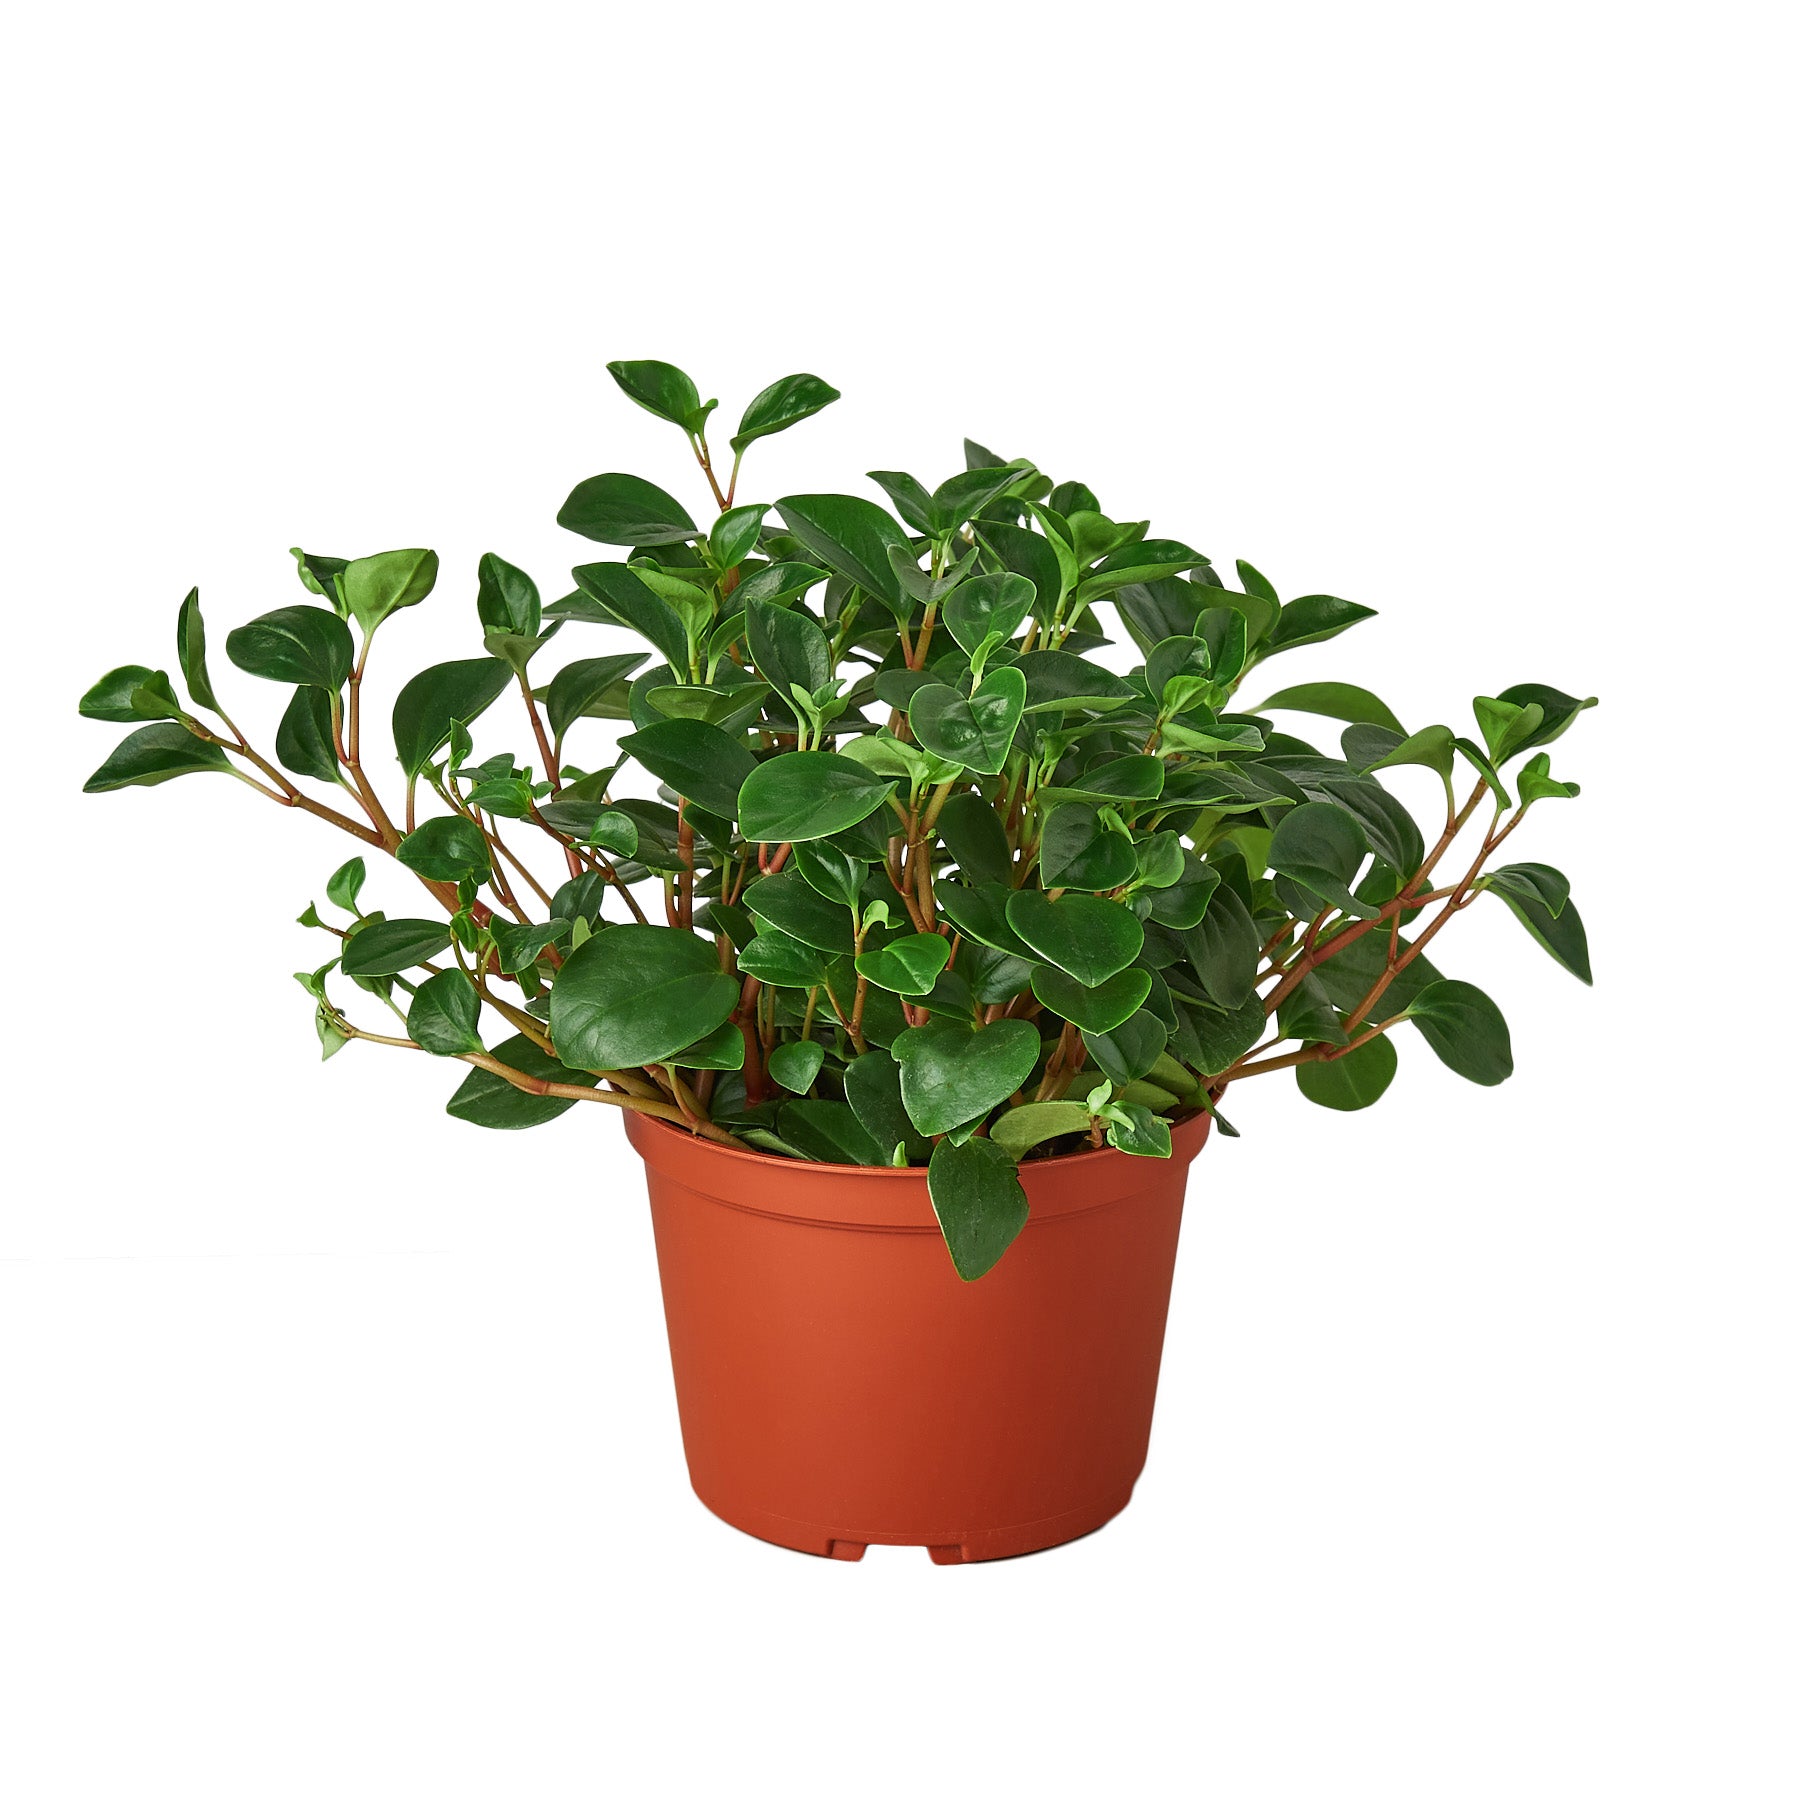 A plant in a pot on a white background, sourced from one of the top garden centers near me.